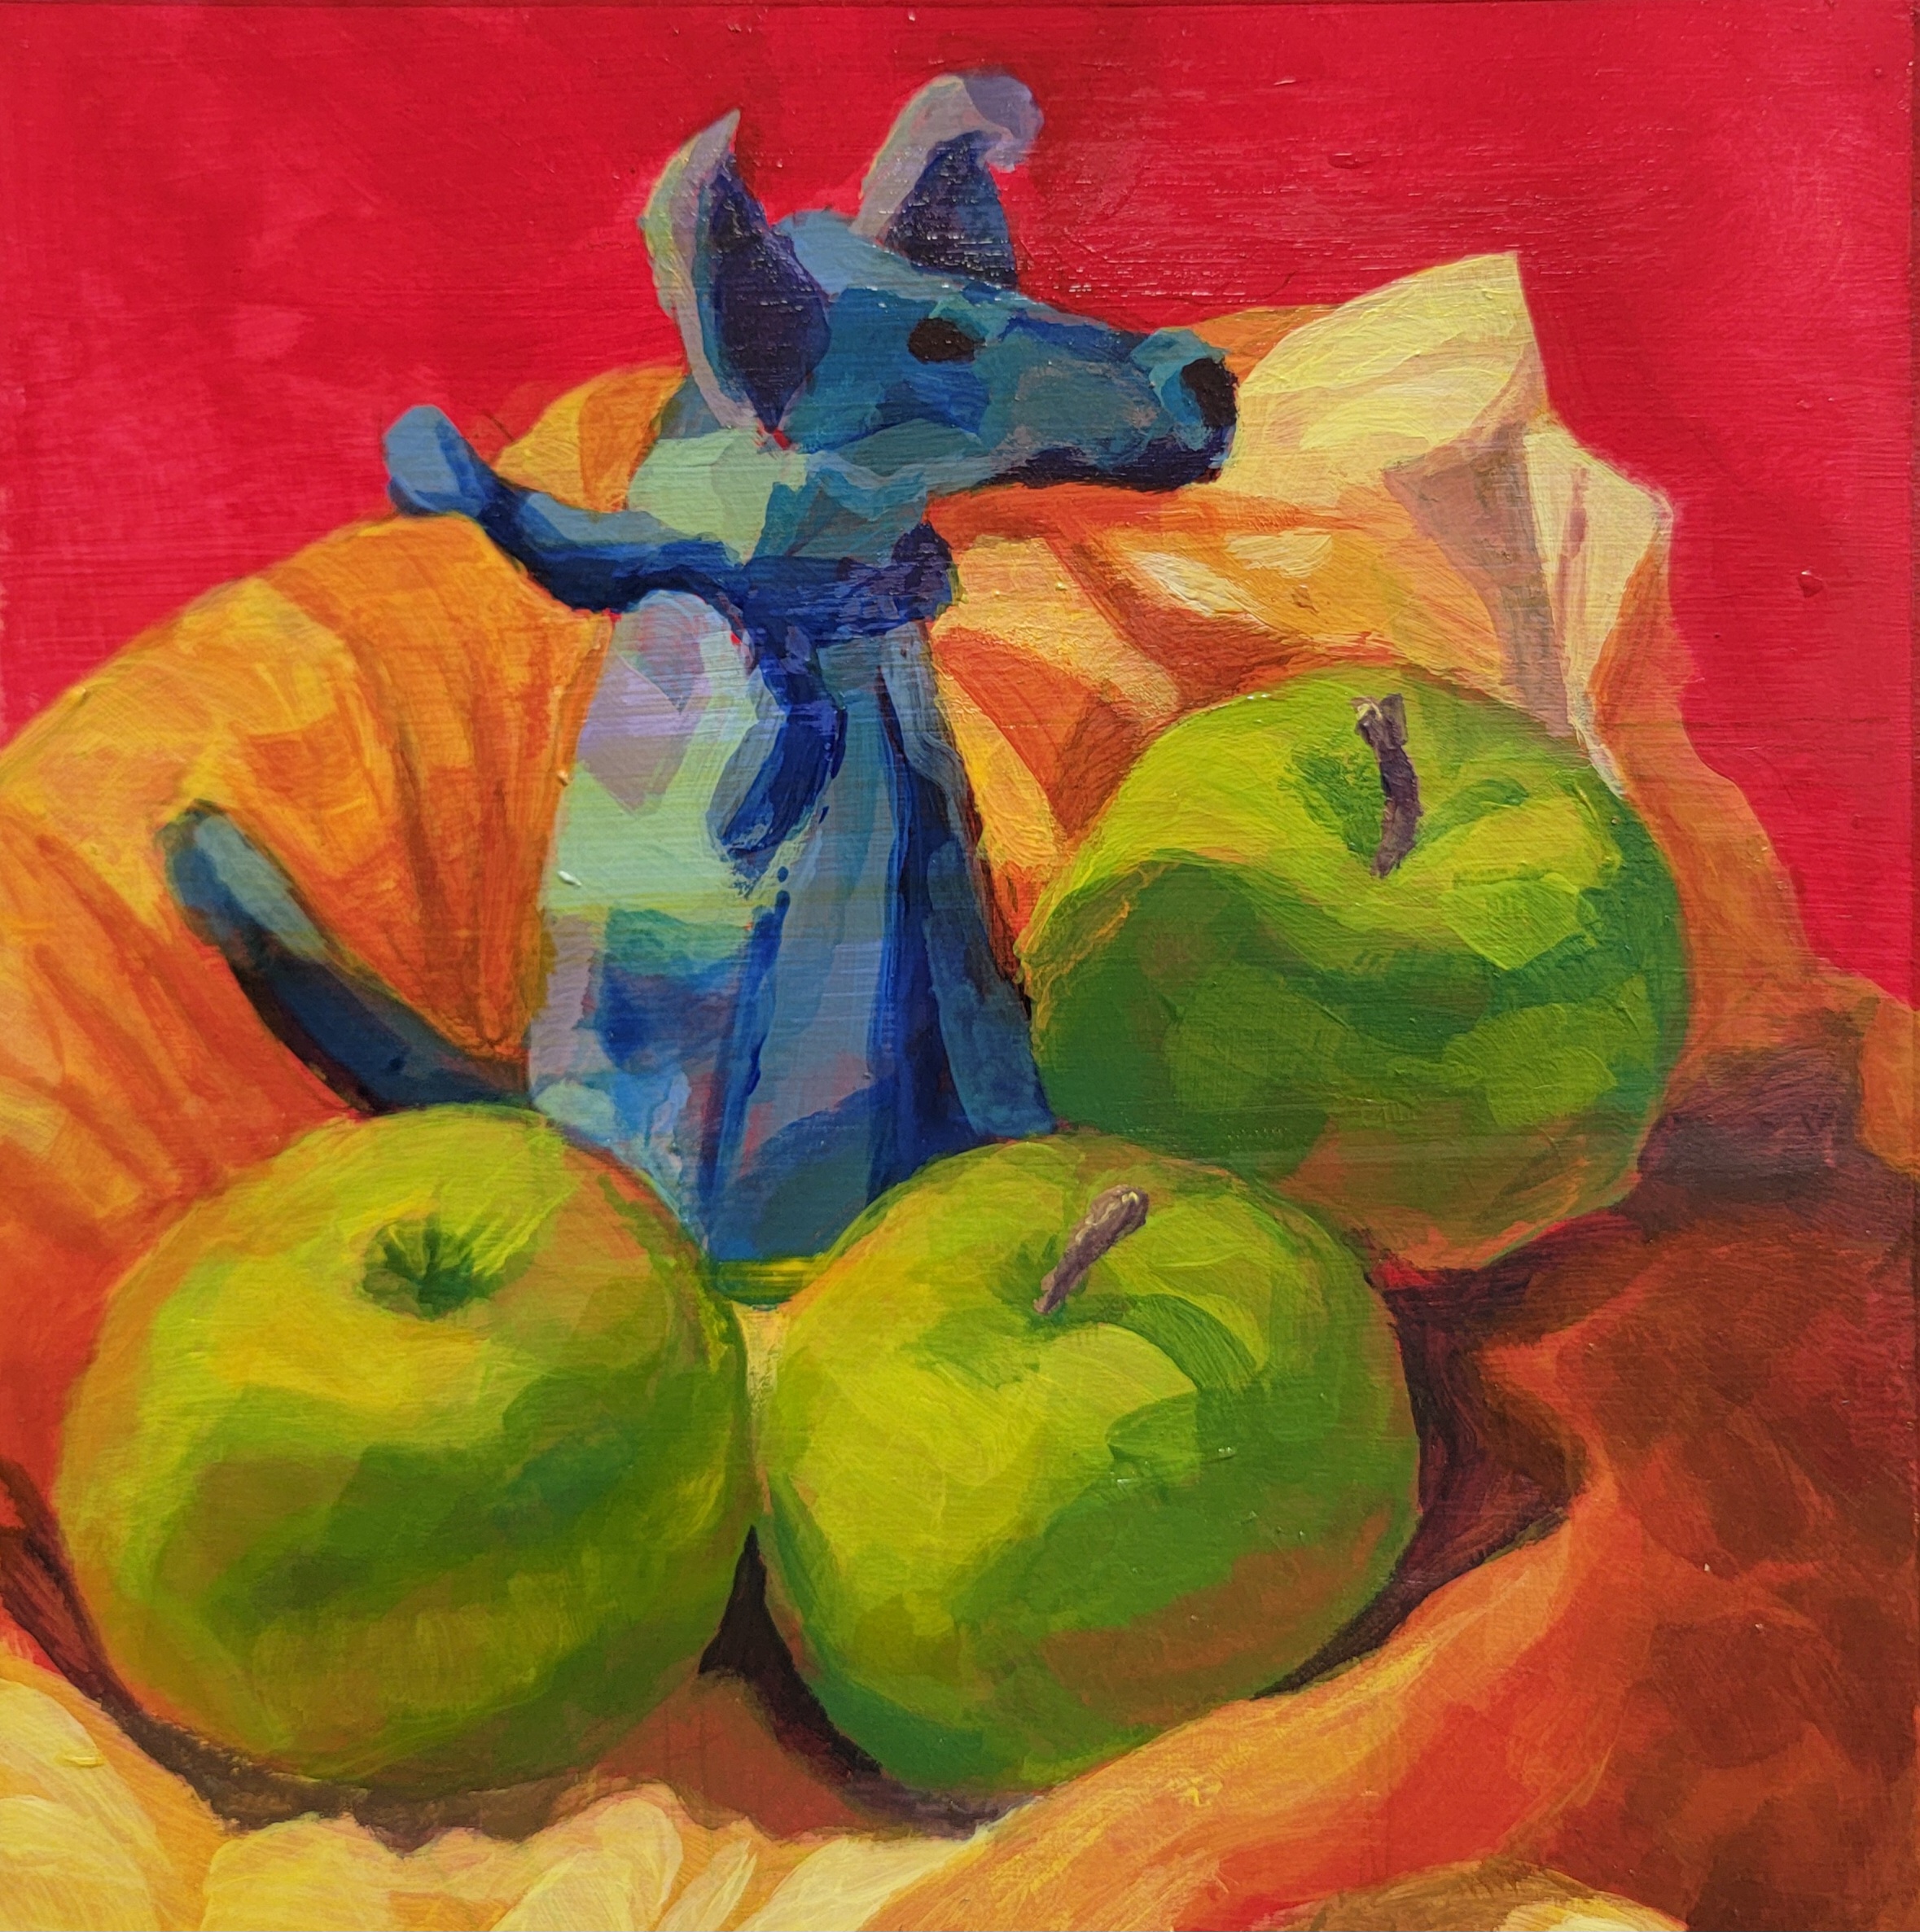 An observational painting of a blue felted dog and three green apples on top of an orange cloth, against a red background.